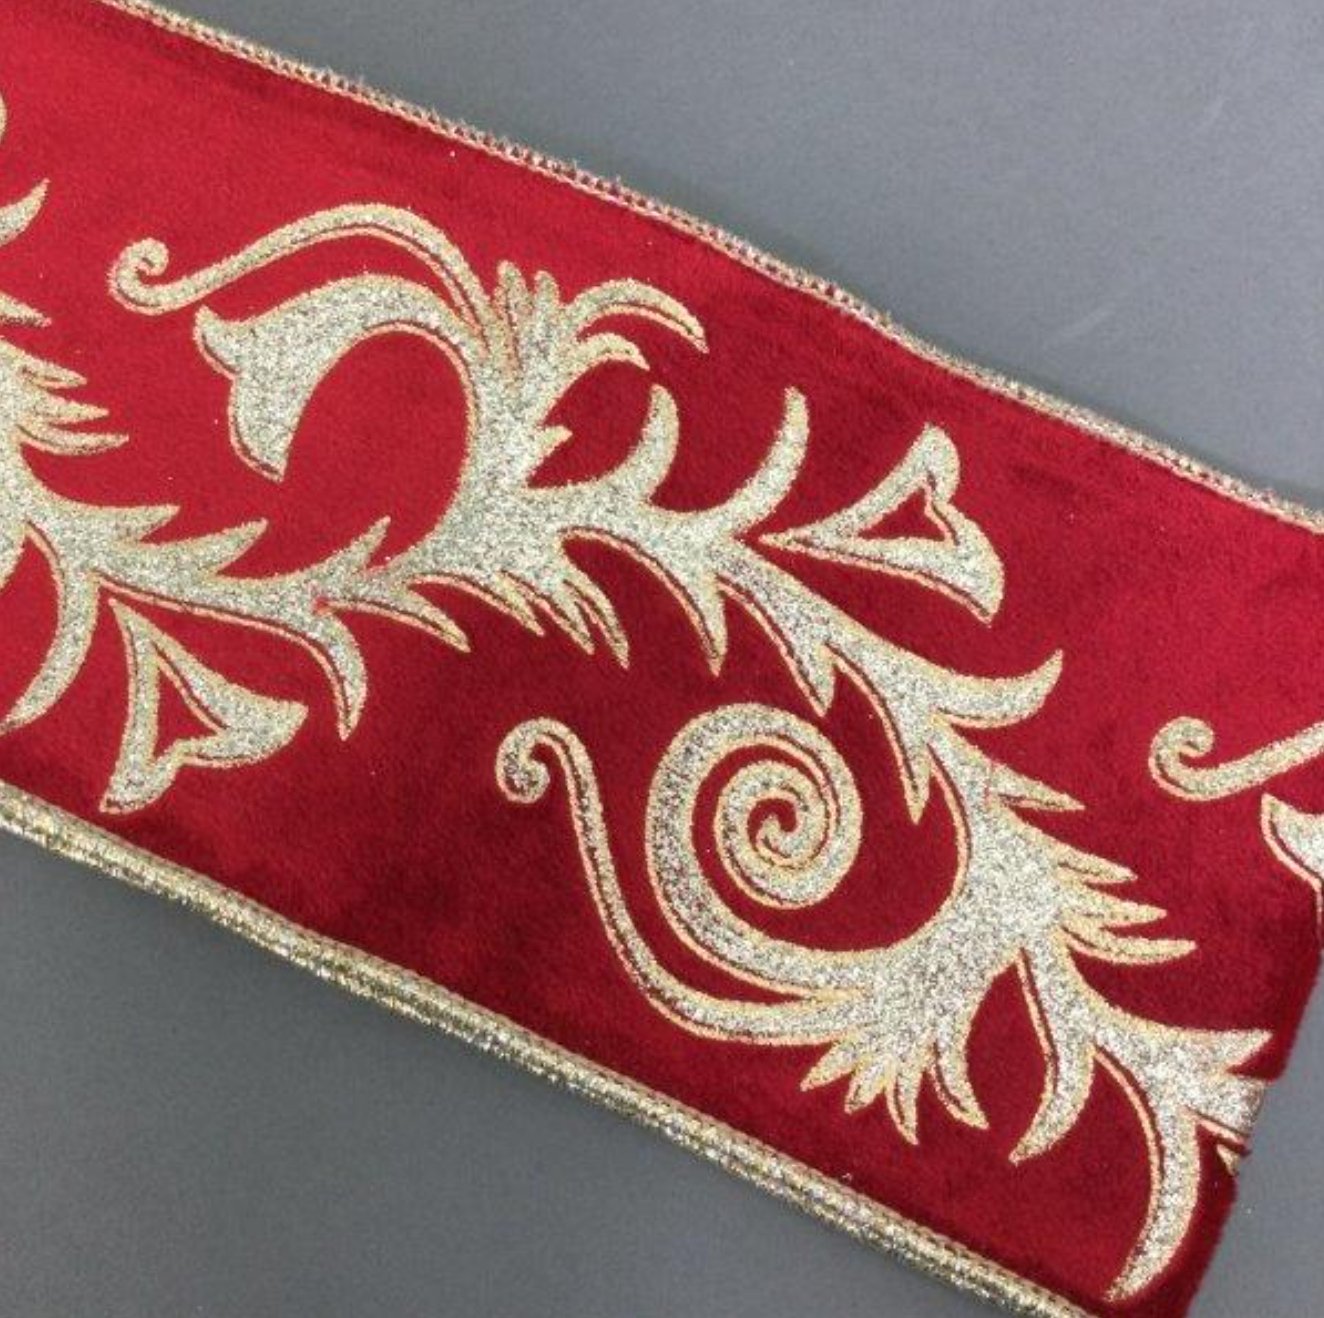 Red Ribbon with Gold Embroidery - My Christmas